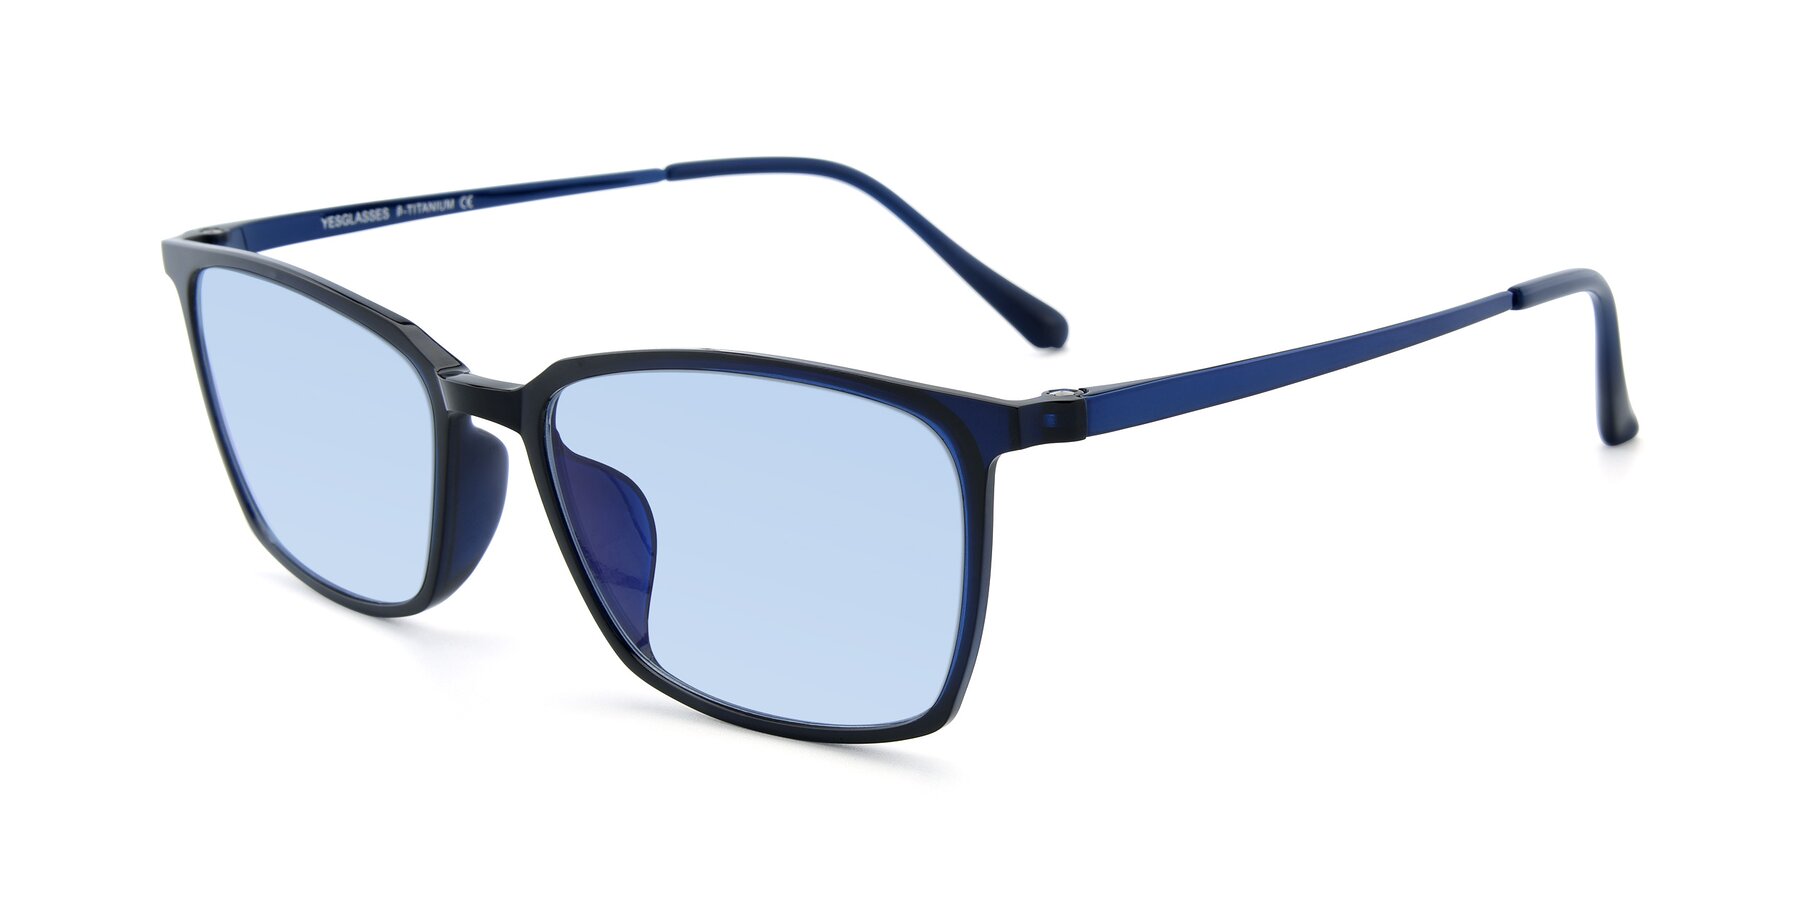 Angle of XC-5009 in Blue with Light Blue Tinted Lenses